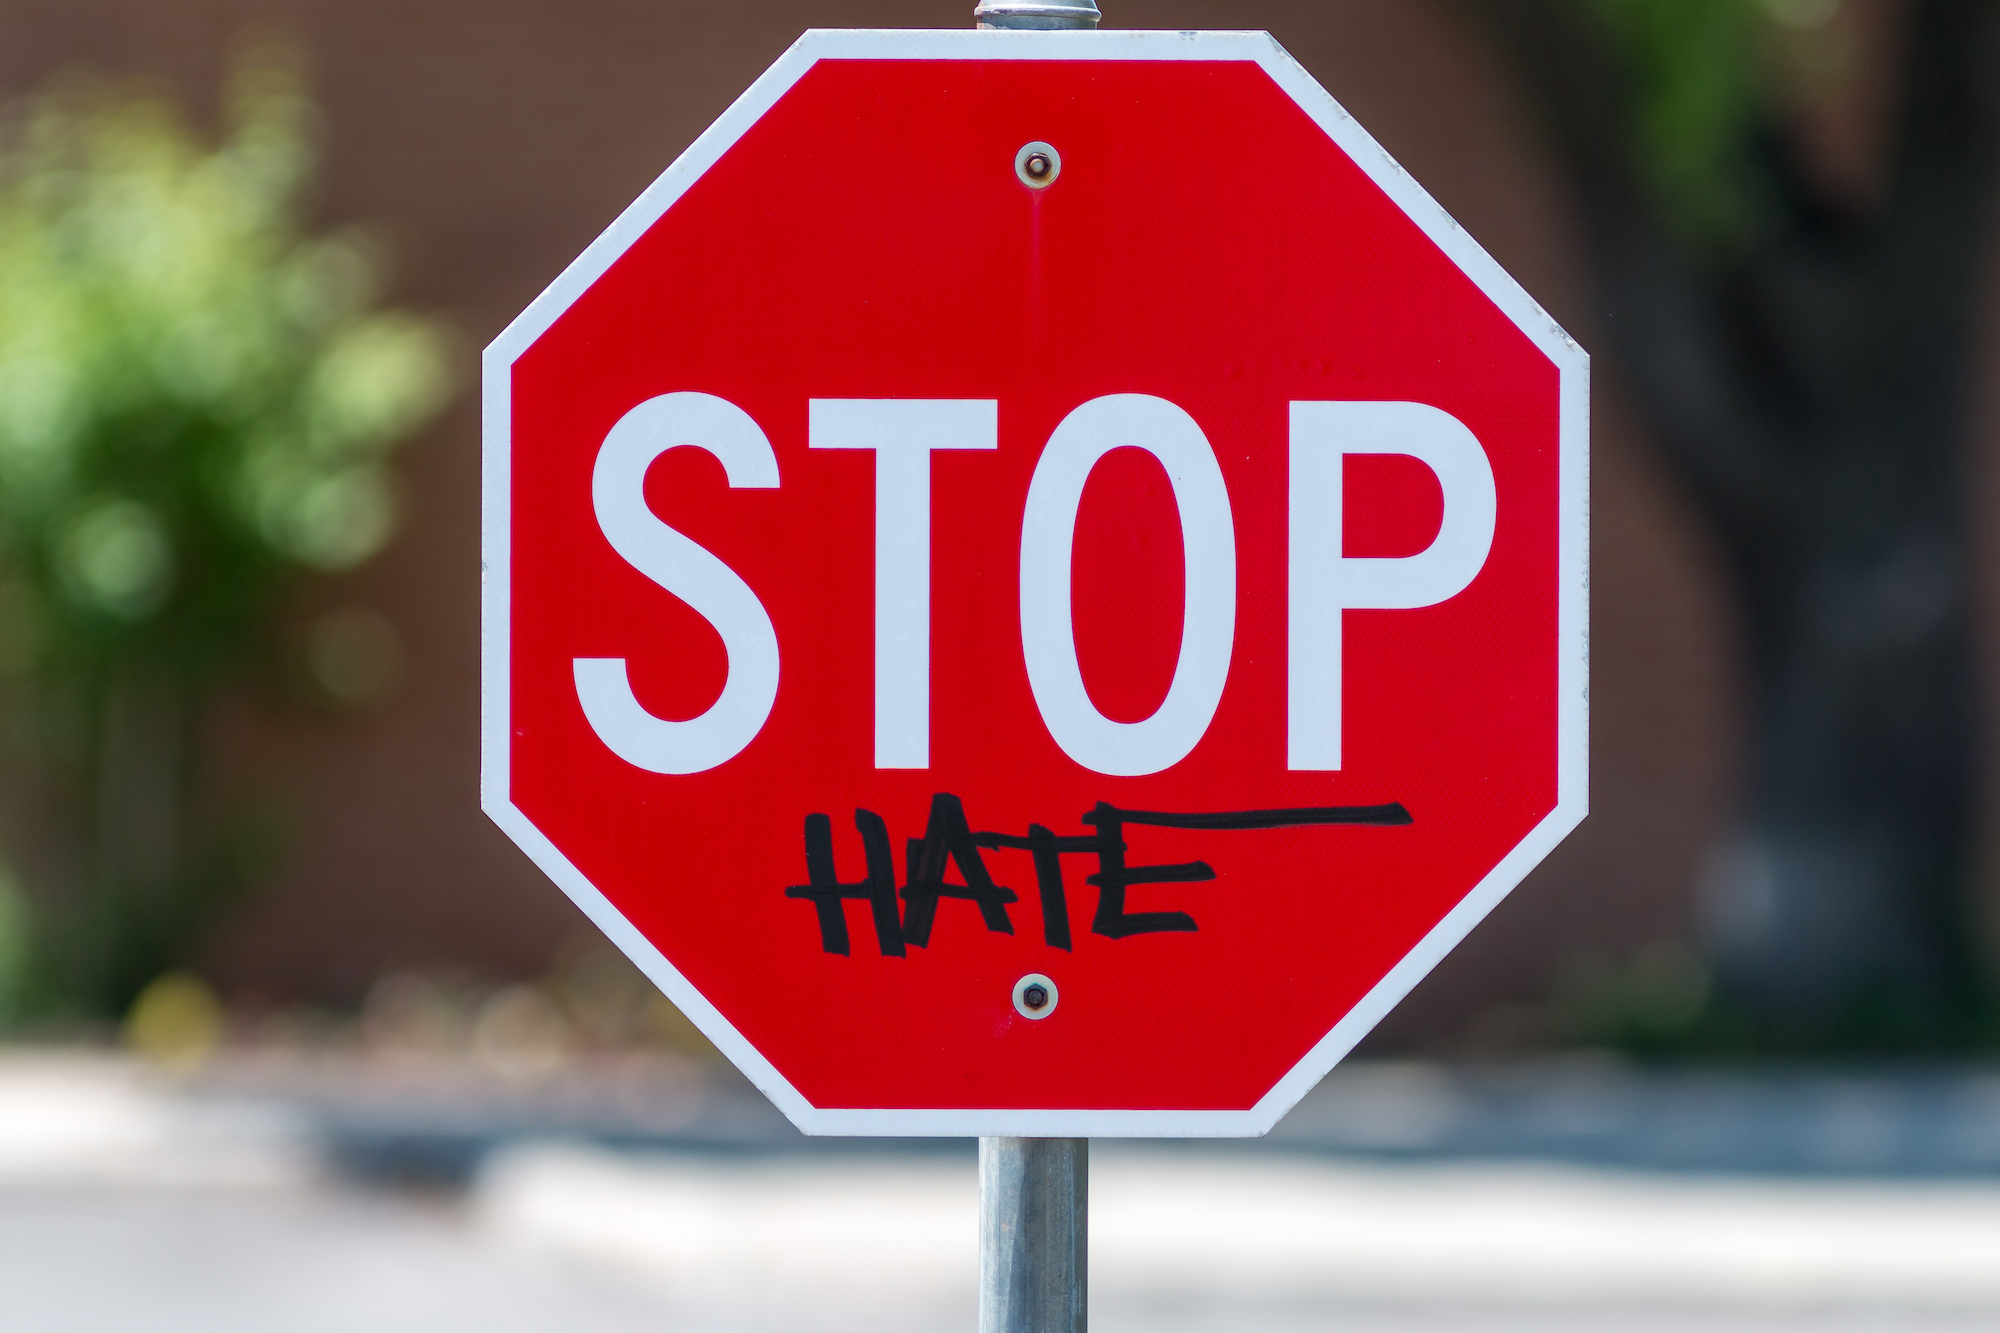 Stop sign with graffiti reading "STOP hate"